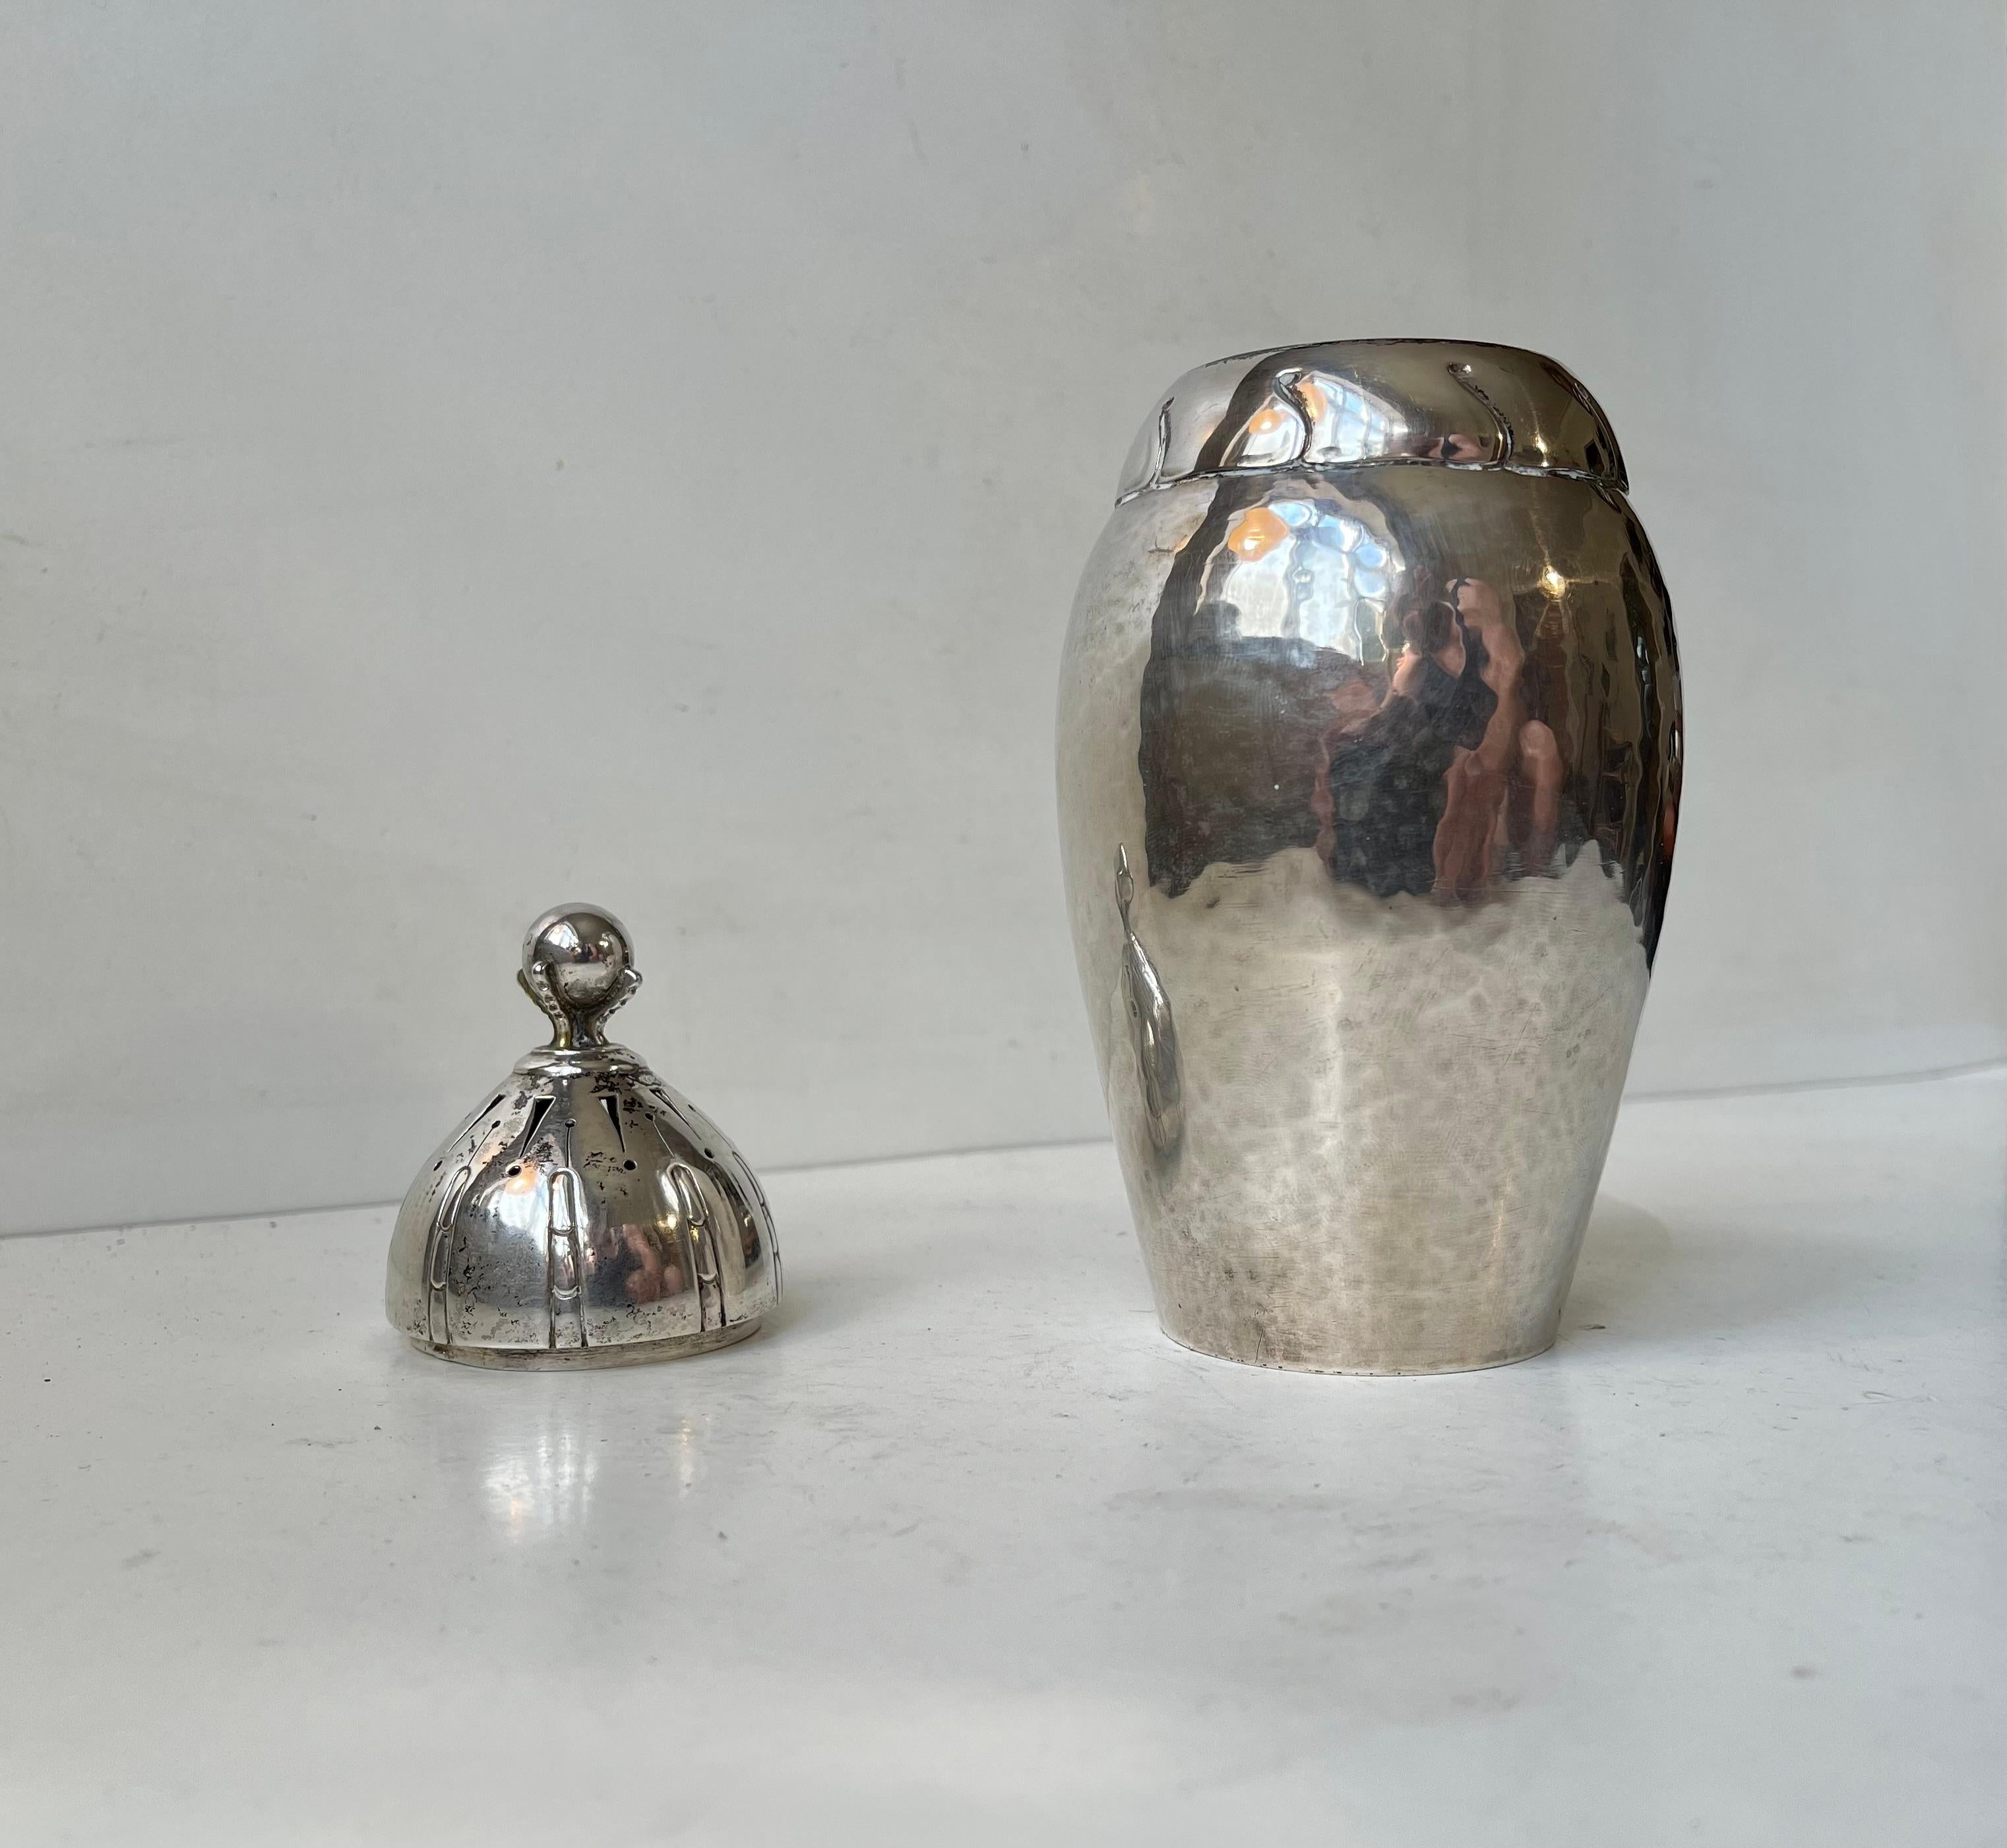 Ornate large sugar caster for strawberries, pancakes etc. Its fashioned from delicately hammered solid silver indicated by the 3 towers to its base. Subtle jugend styling and topped with a birds or dragons claw holding a sphere or globe - a symbol